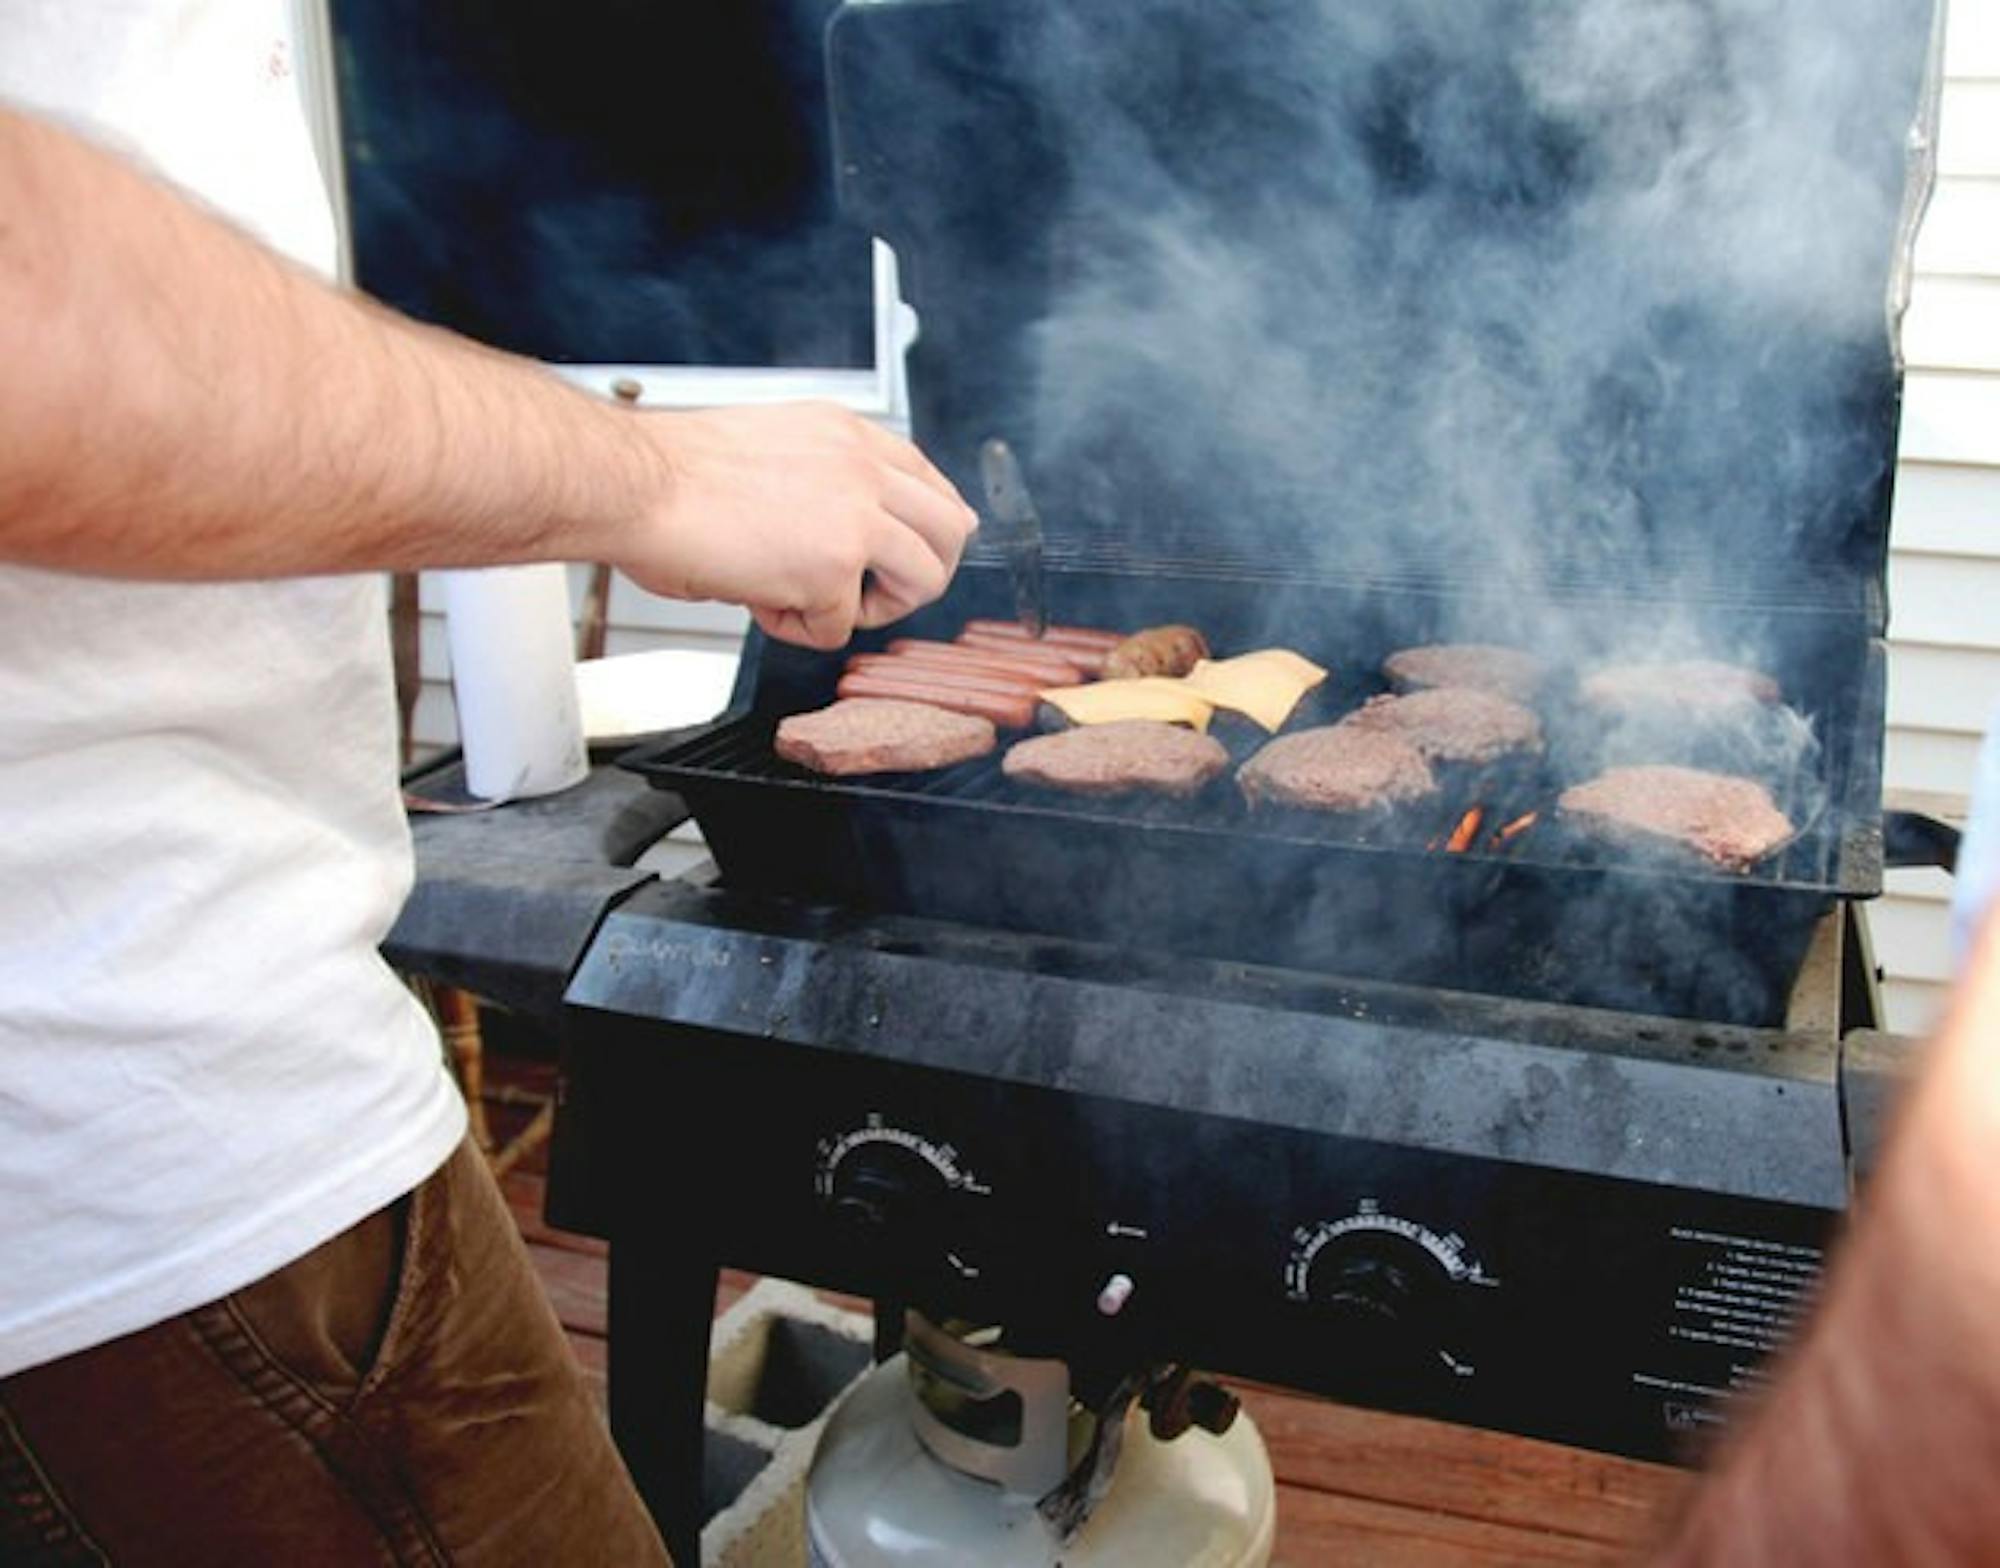 Although a seemingly safe outdoor activity, grills can prove hazardous in careless hands.